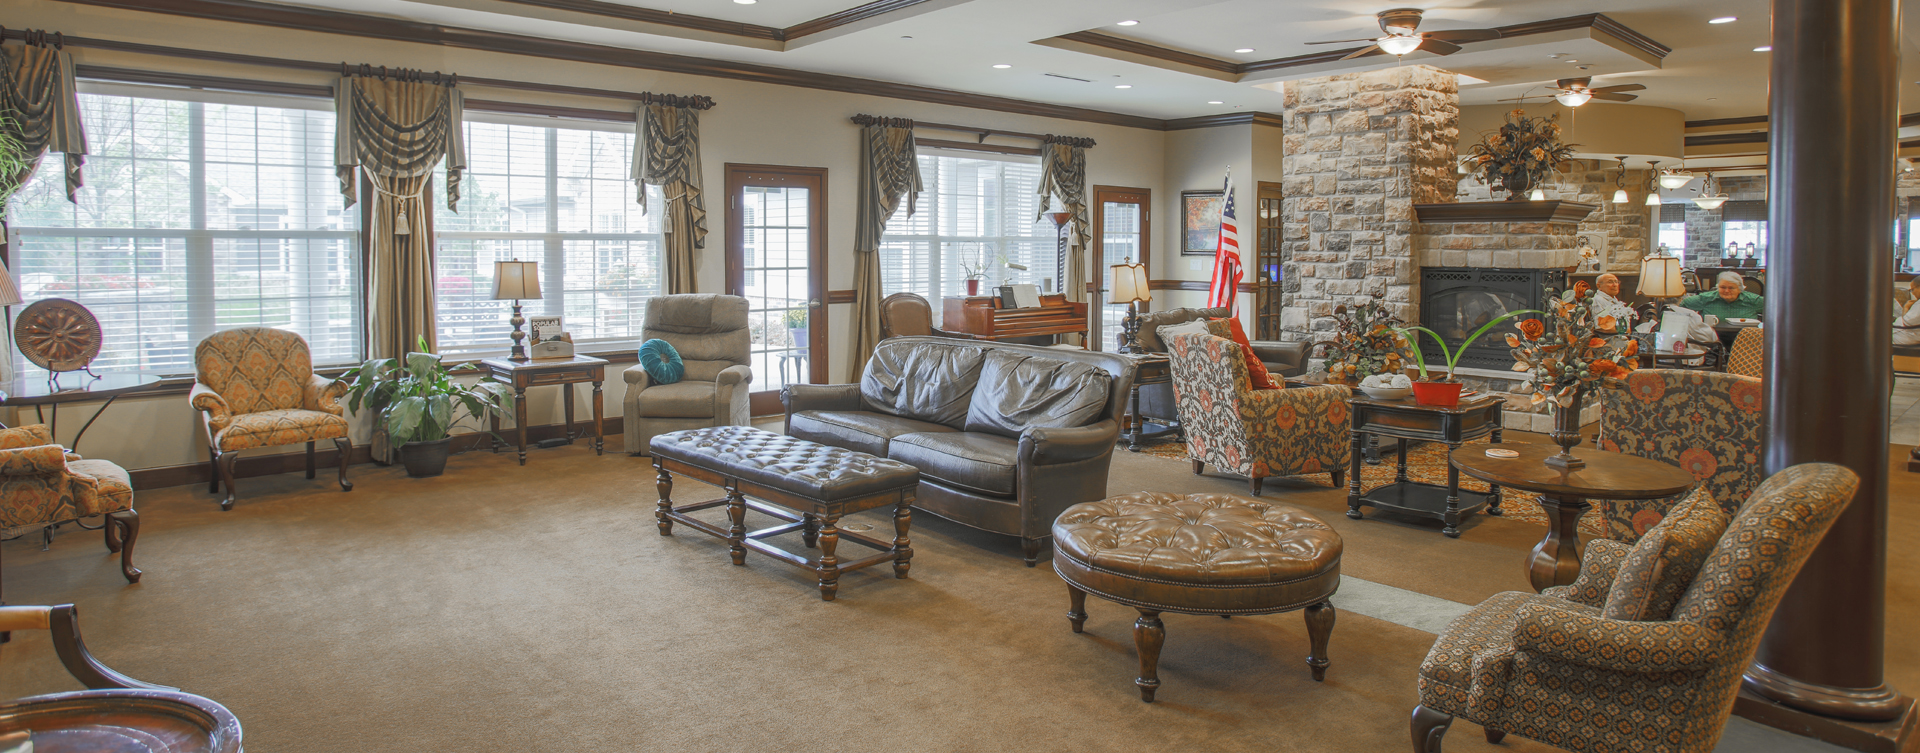 Socialize with friends in the living room at Bickford of Carmel